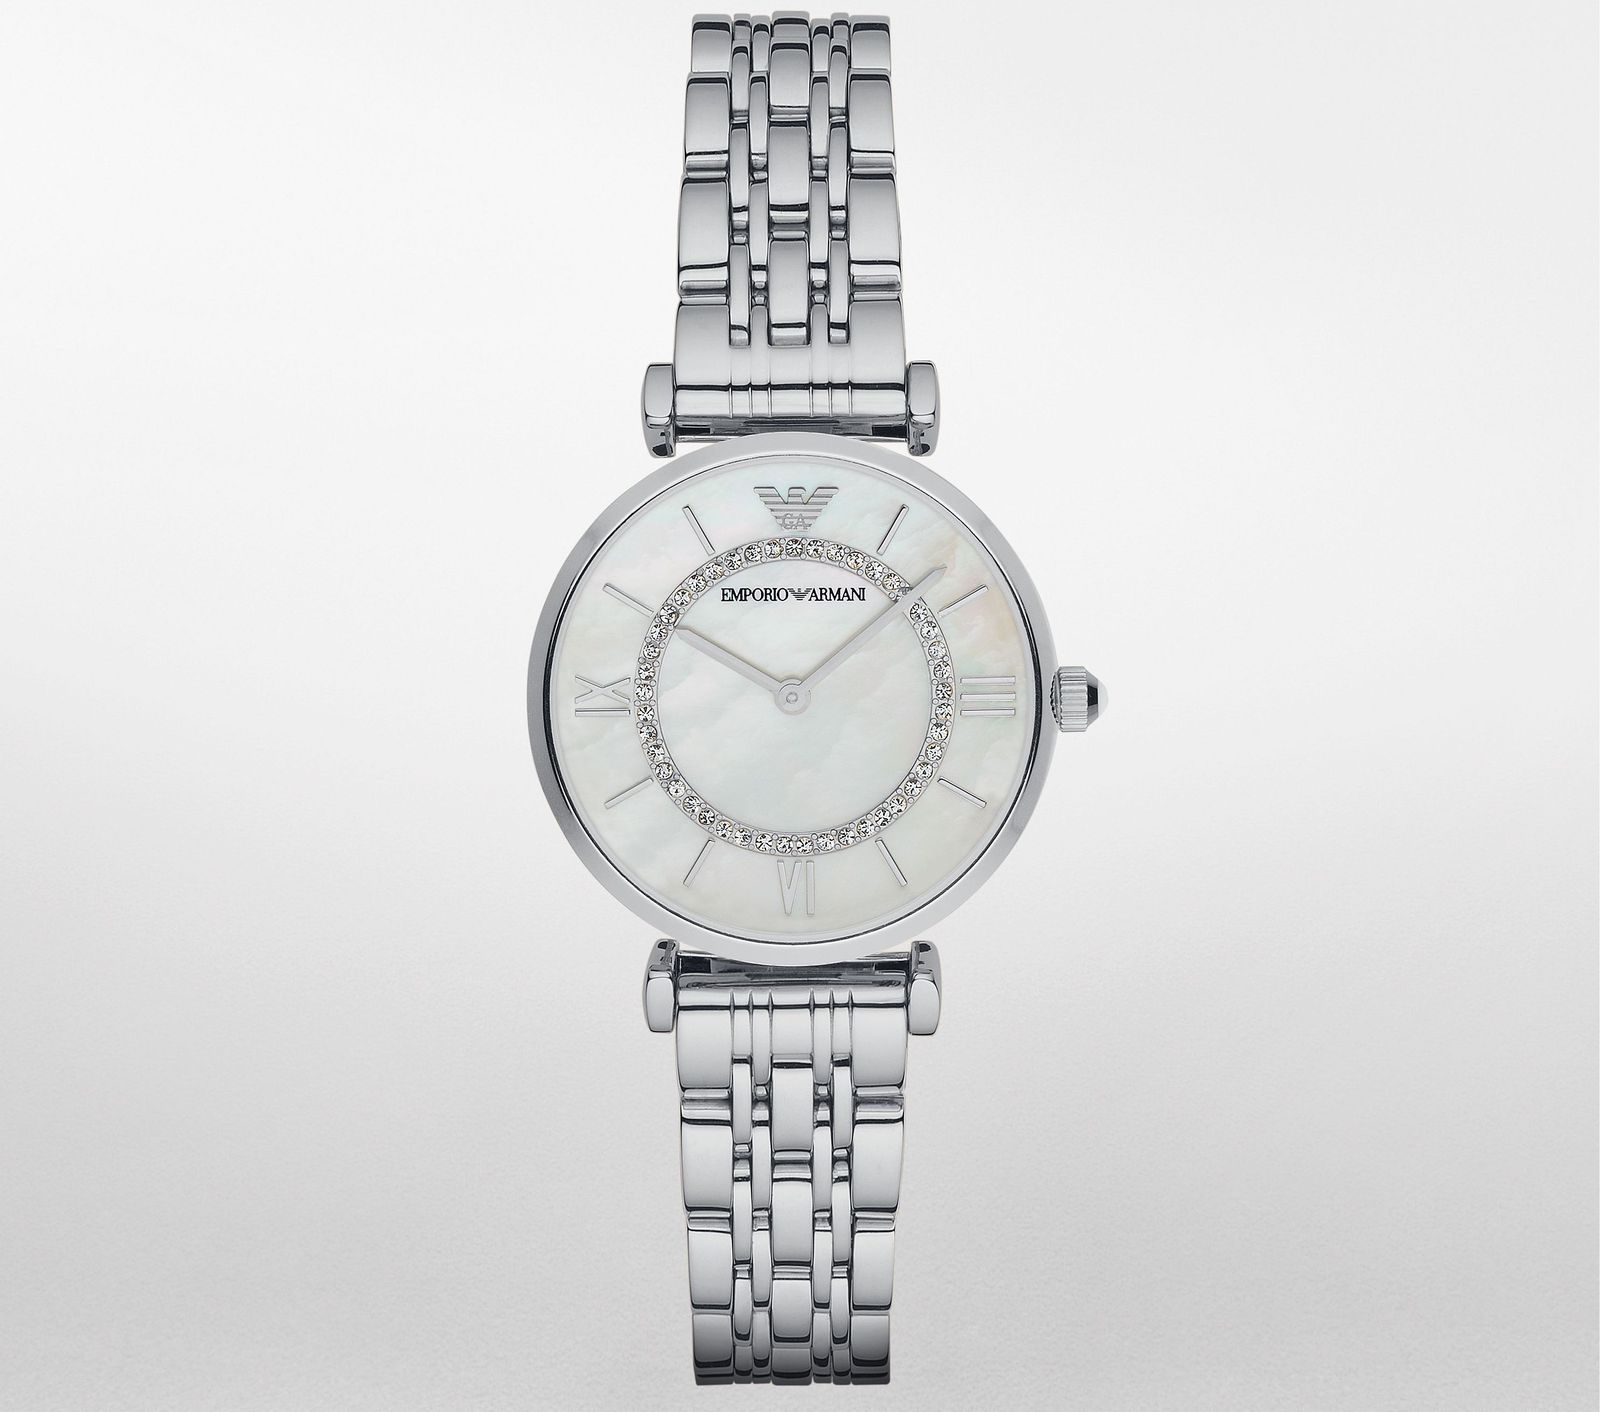 New Emporio Armani Women's Watch Silver/Mother of Pearl AR1908